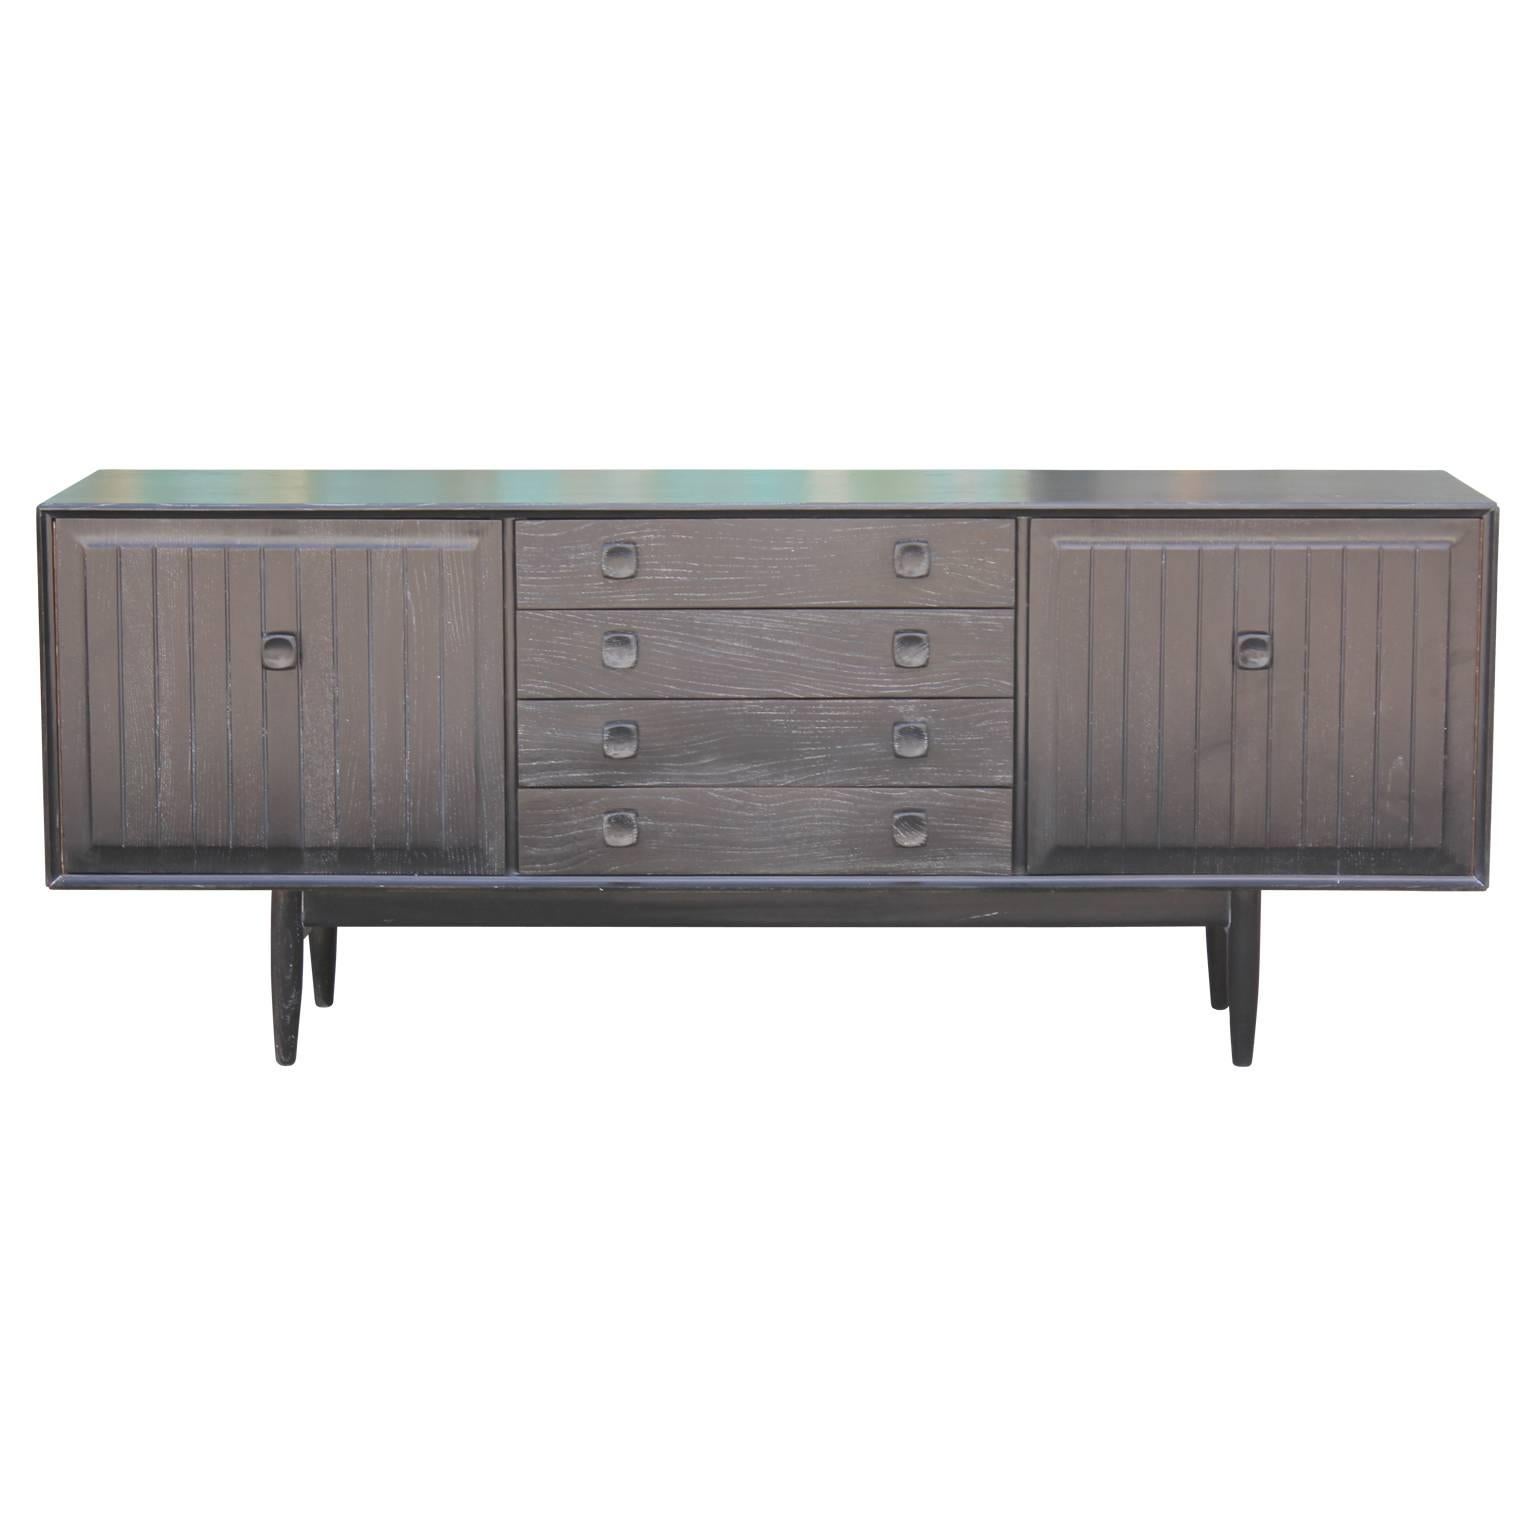 Gorgeous Mid-Century Modern credenza with a lovely cerused finish. This piece features four drawers in the centre and two cabinet spaces on either side. The cabinet on the right features a single corner shelf.